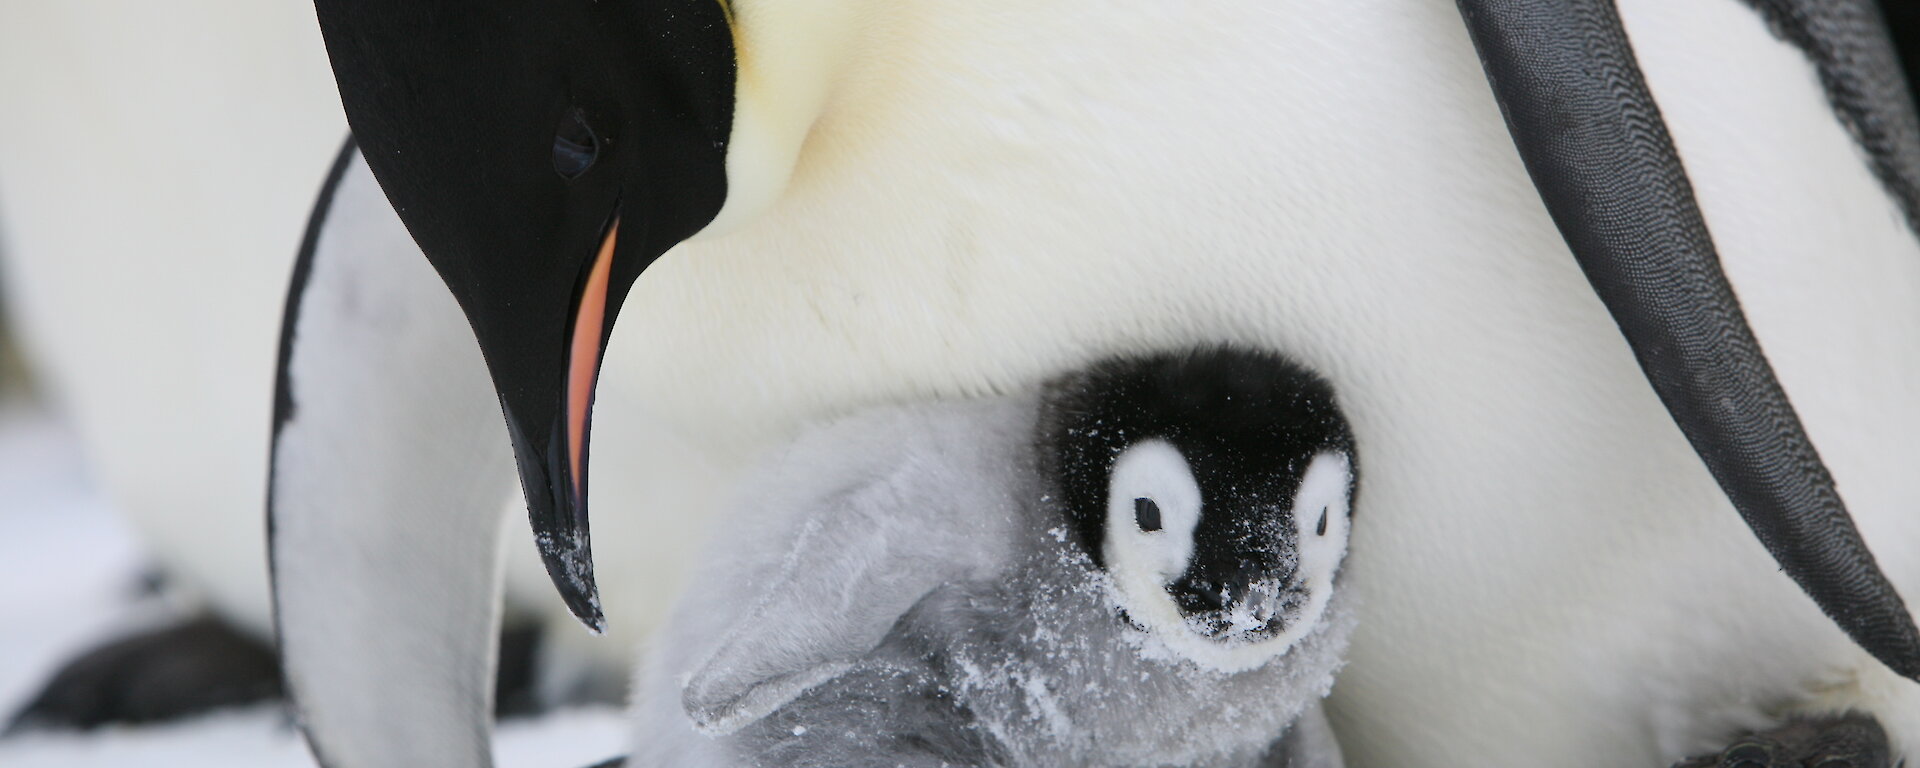 A penguin chick in the snow with an adult penguin leaning over it.